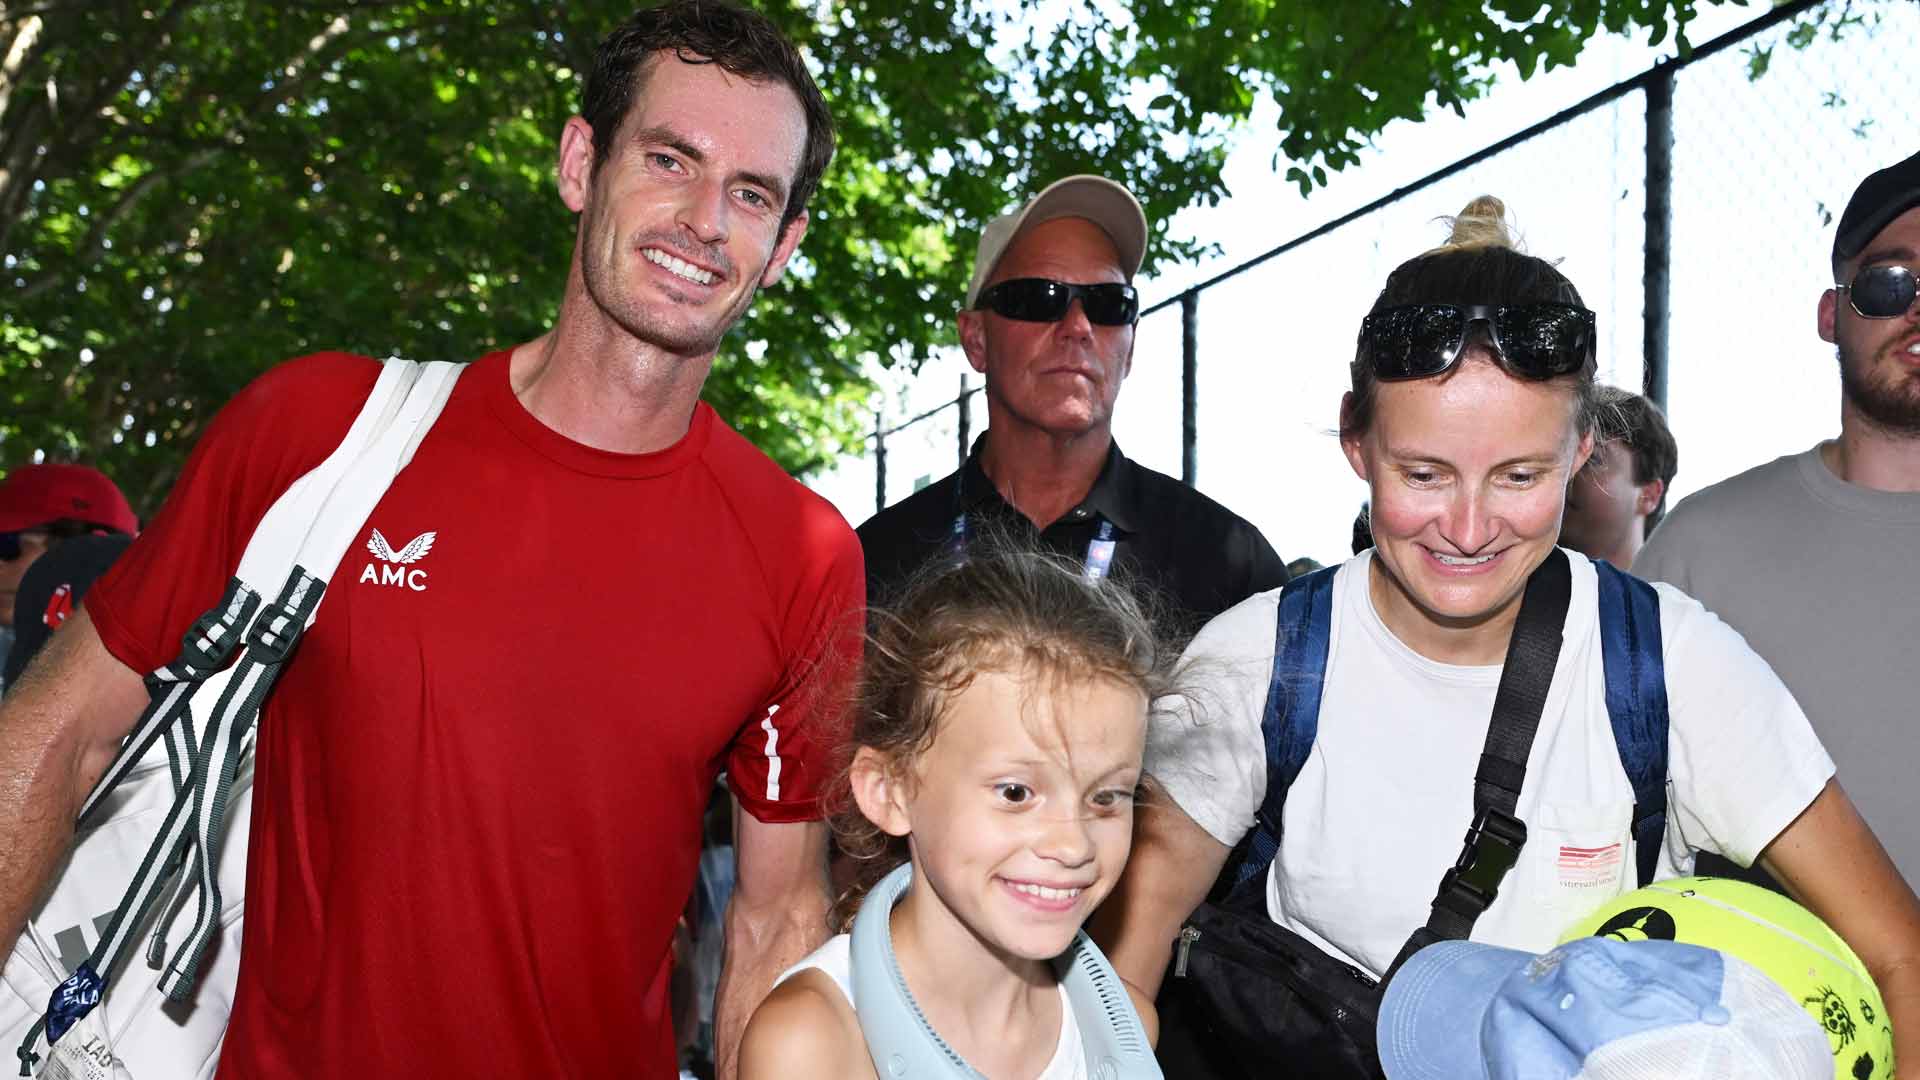 <a href='https://www.atptour.com/en/players/andy-murray/mc10/overview'>Andy Murray</a>